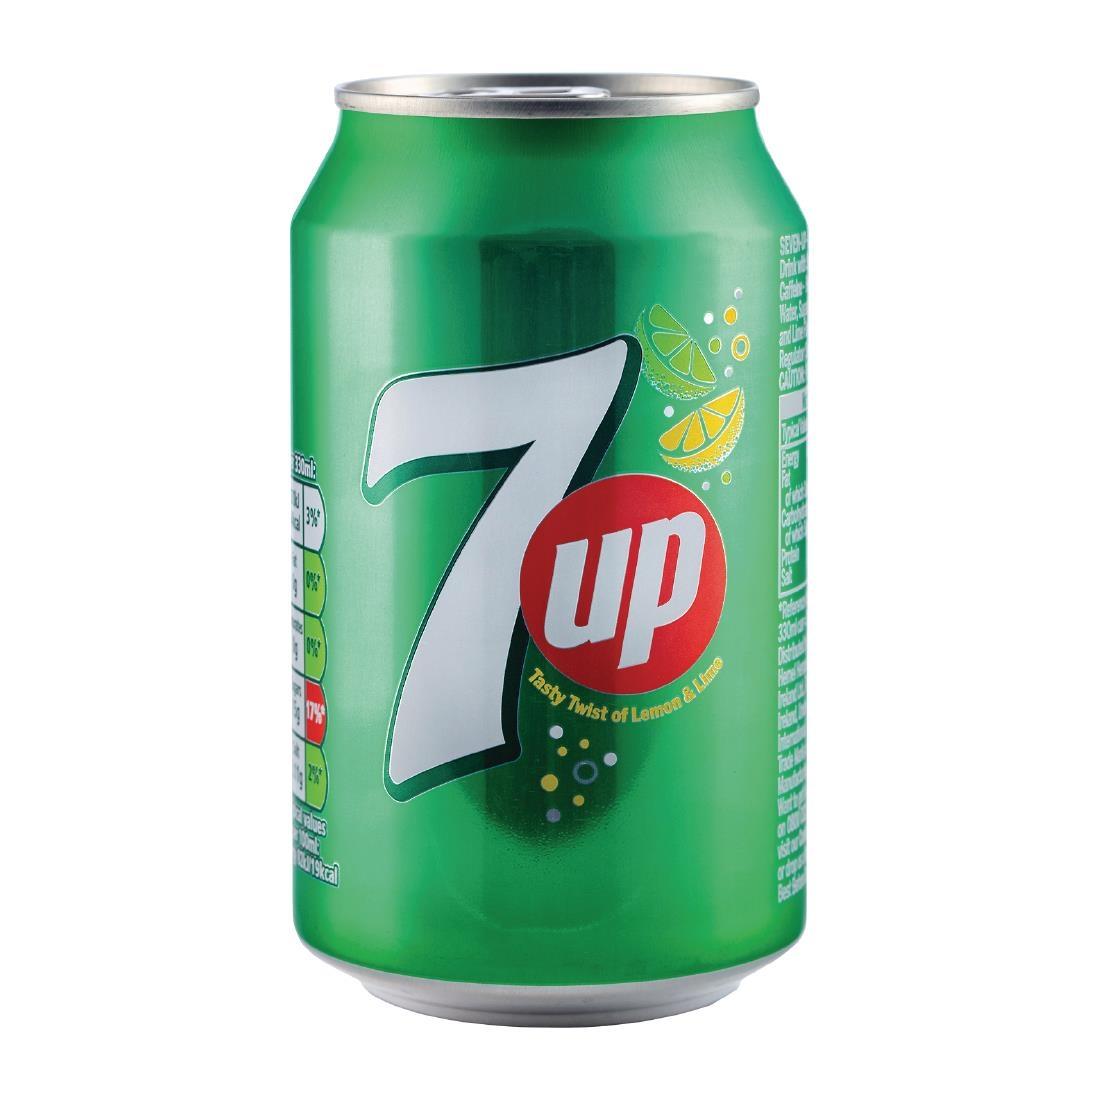 7up Cans 330ml (Pack of 24) - FW836  - 1